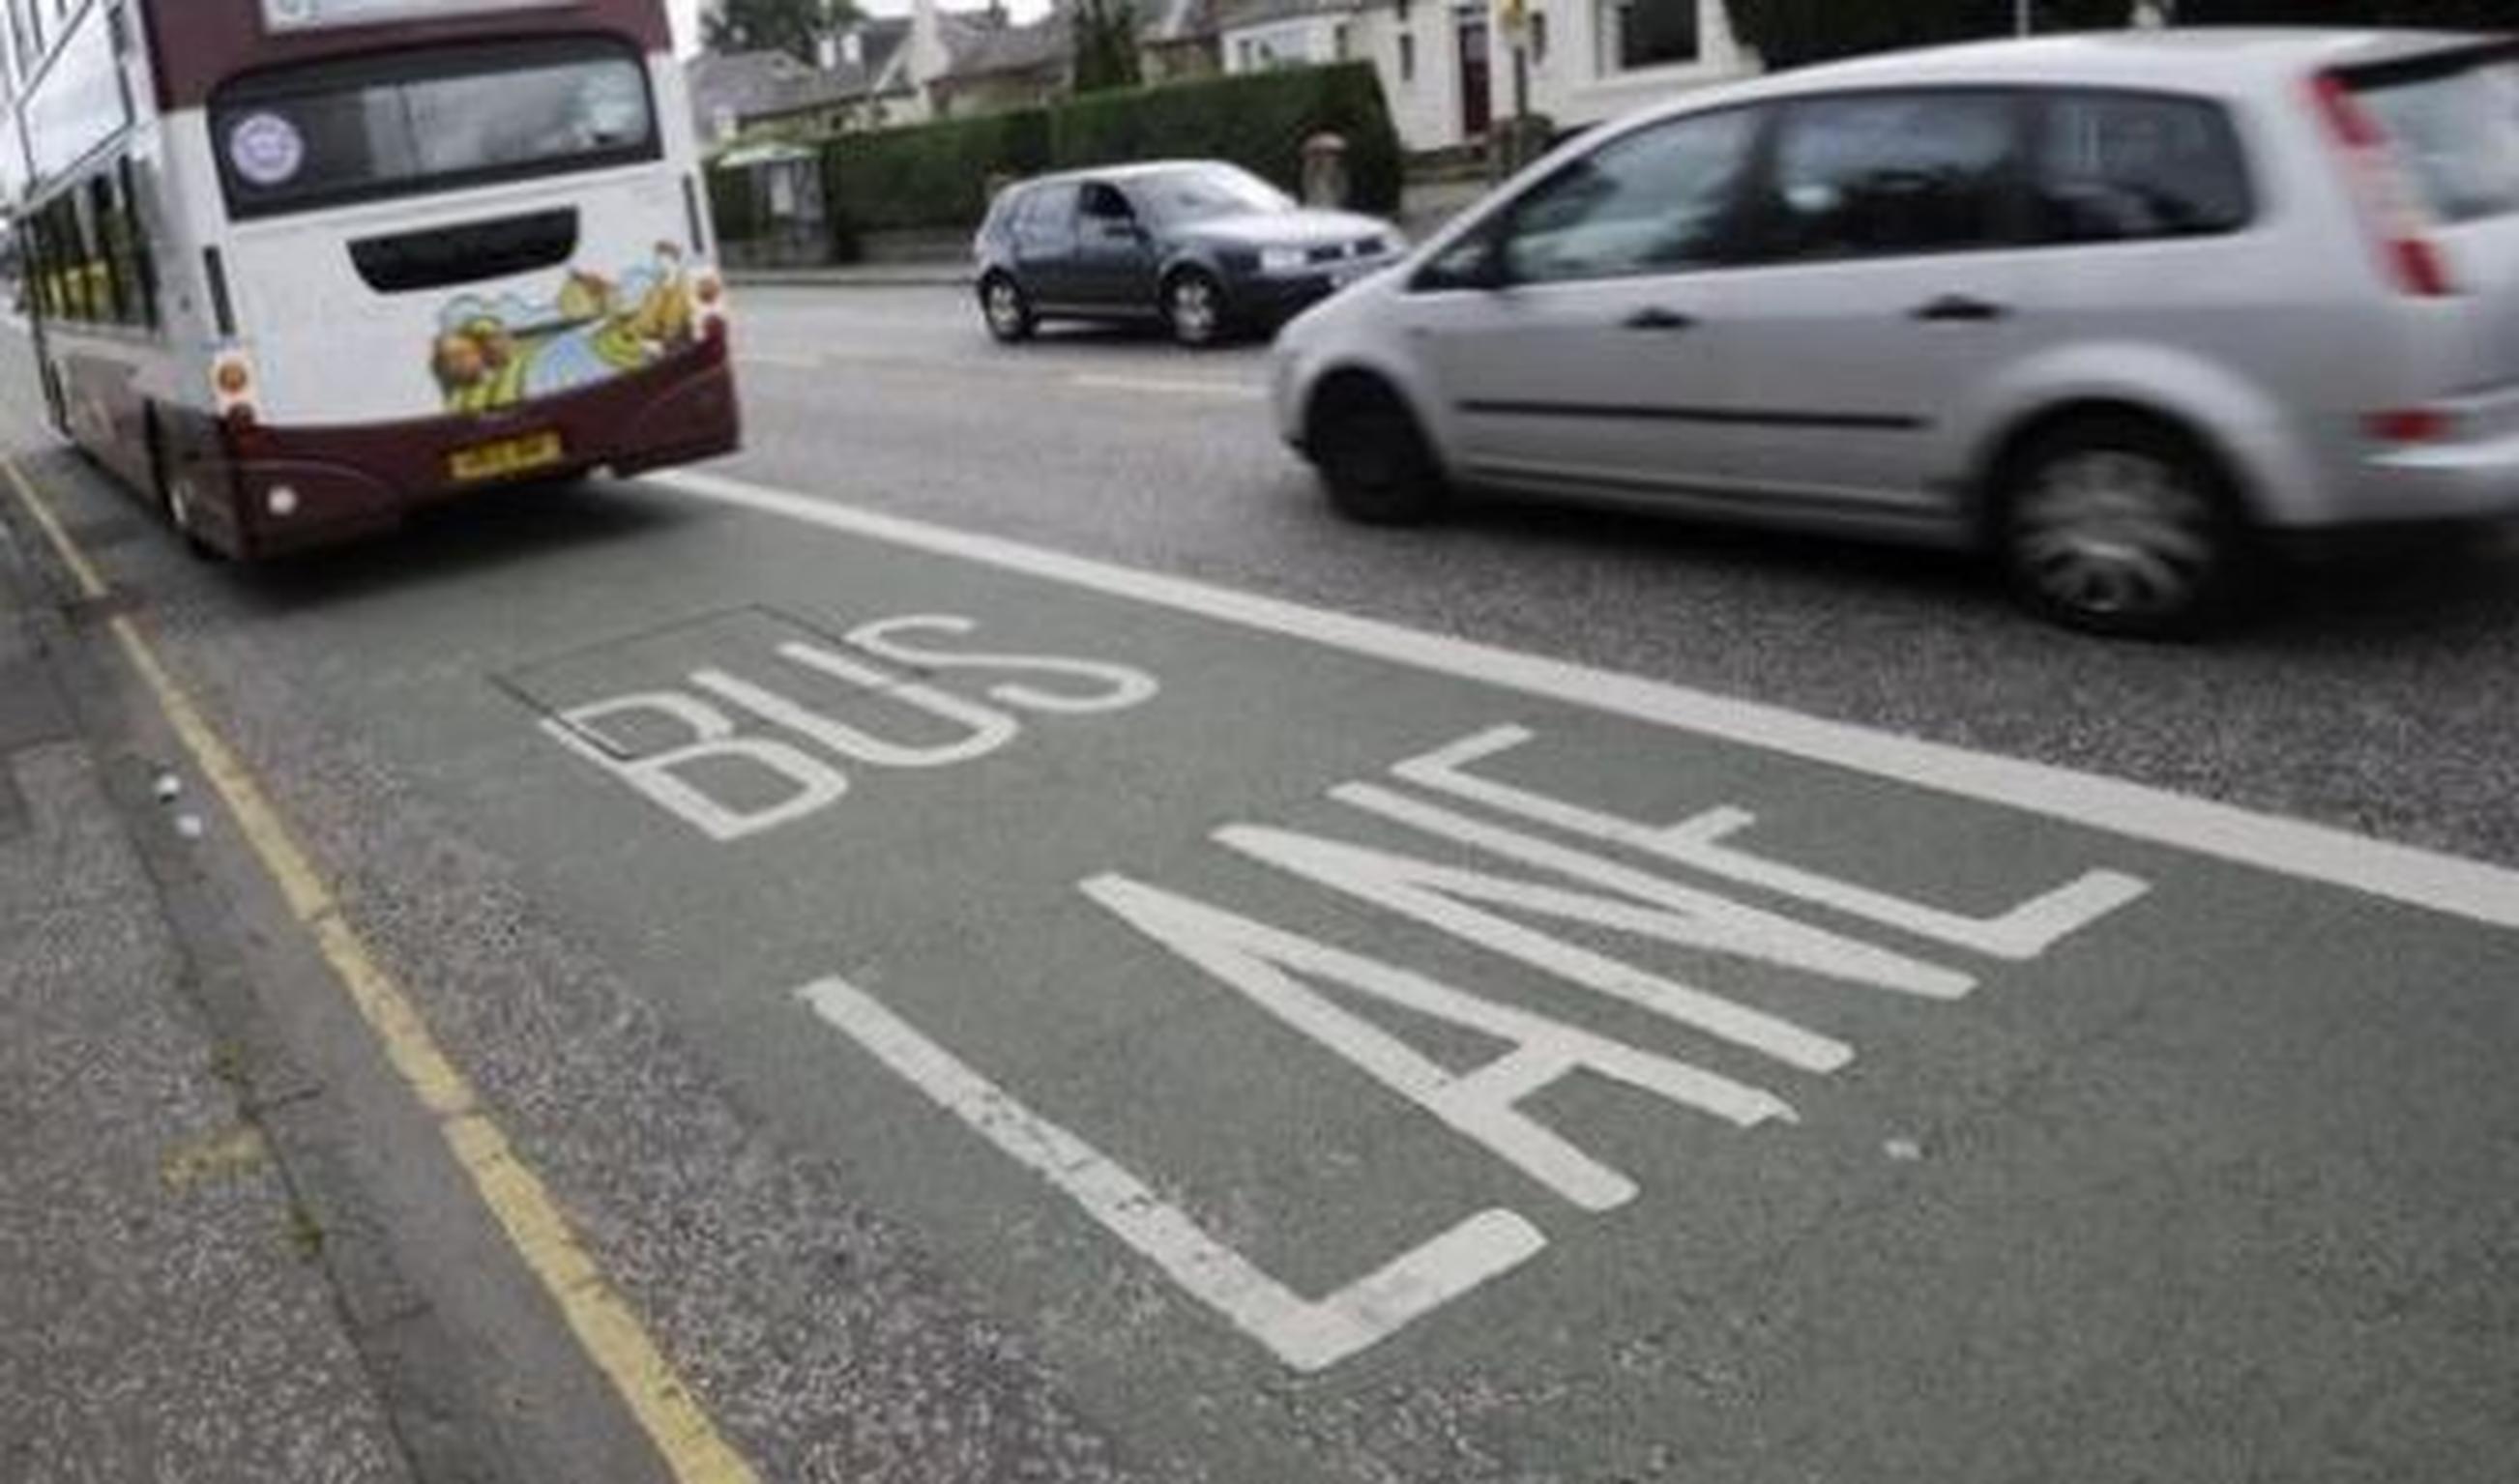 Lothian Buses wants to see bus lanes kept clear